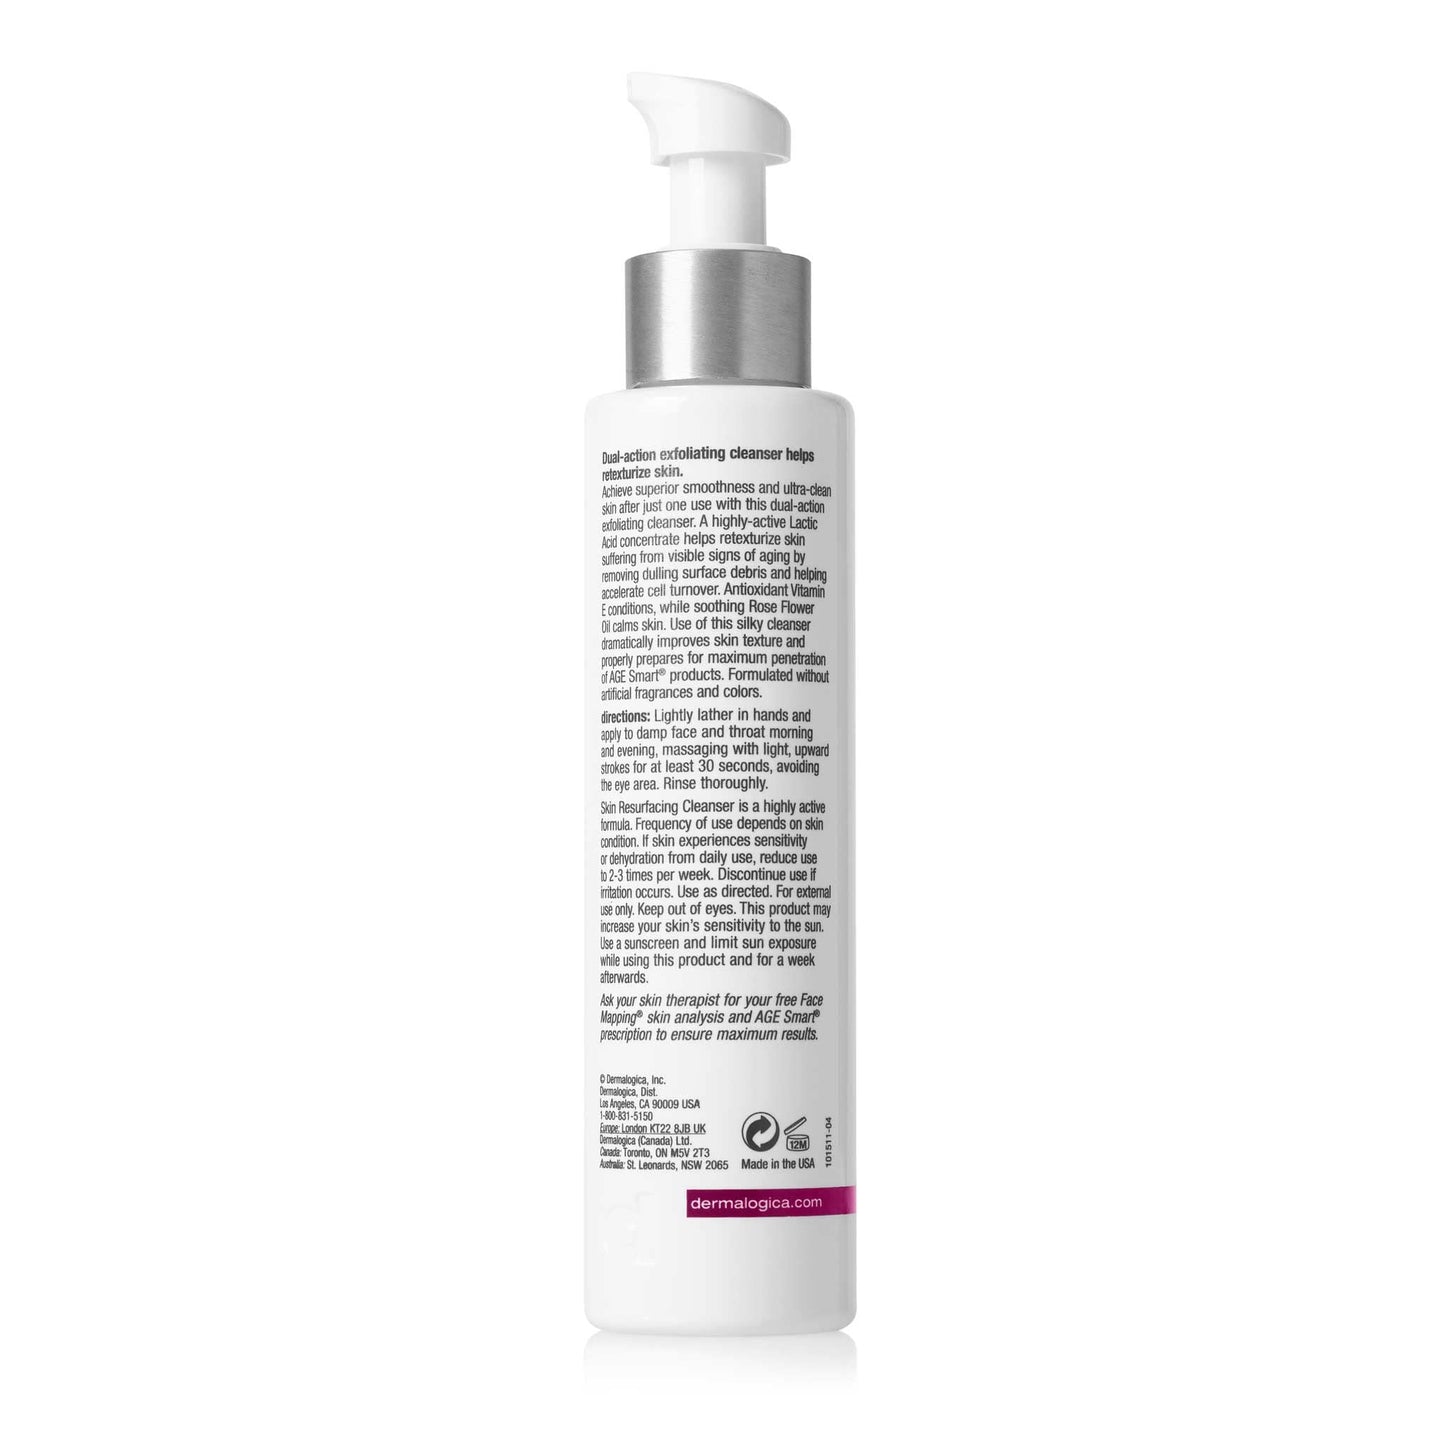 Dermalogica Skin Resurfacing Cleanser, Dual-Action Anti-Aging Exfoliating Face Wash and Cleanser - Smoothes Skin with Lactic Acid, 5.1 Fl Oz